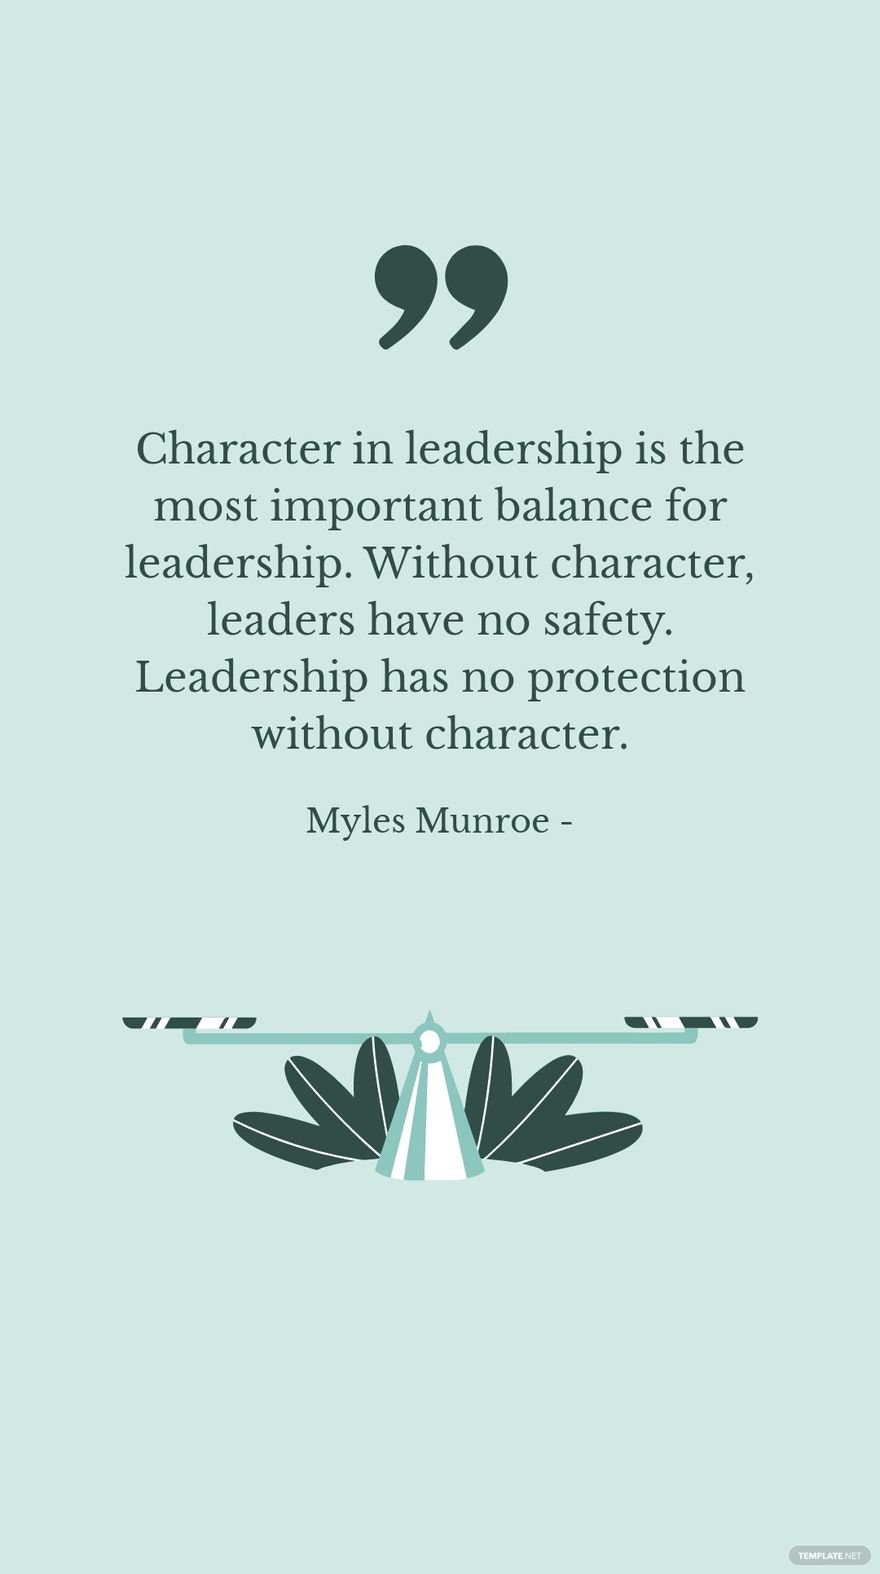 Myles Munroe - Character in leadership is the most important balance for leadership. Without character, leaders have no safety. Leadership has no protection without character.